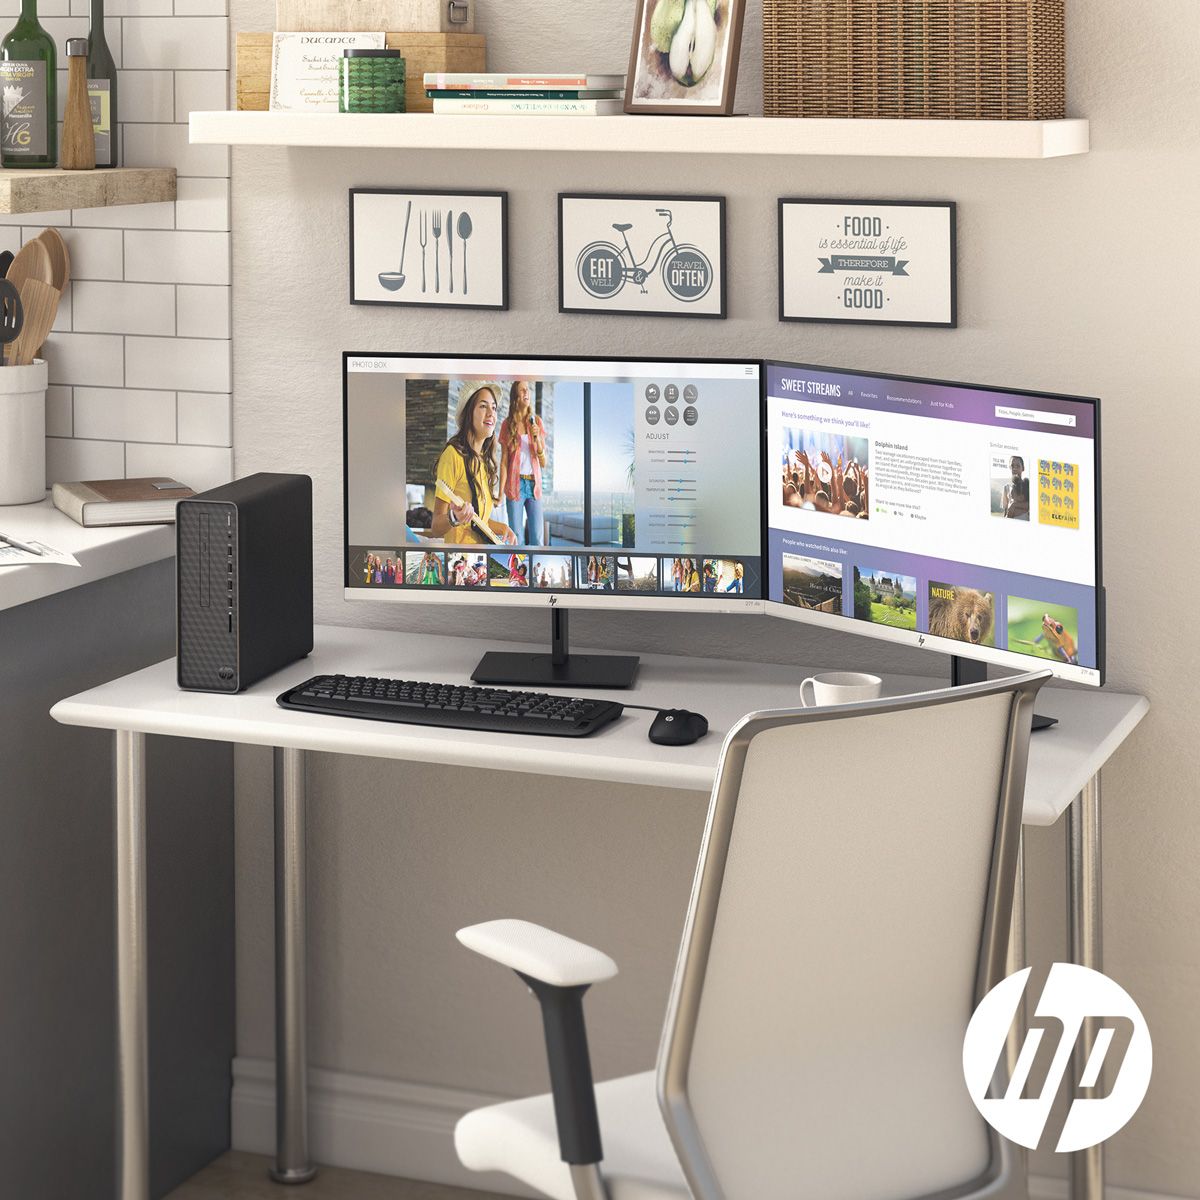 PERFECT WORKING FROM HOME WITH THE HP SLIM S01-AF0010NA DESKTOP PC